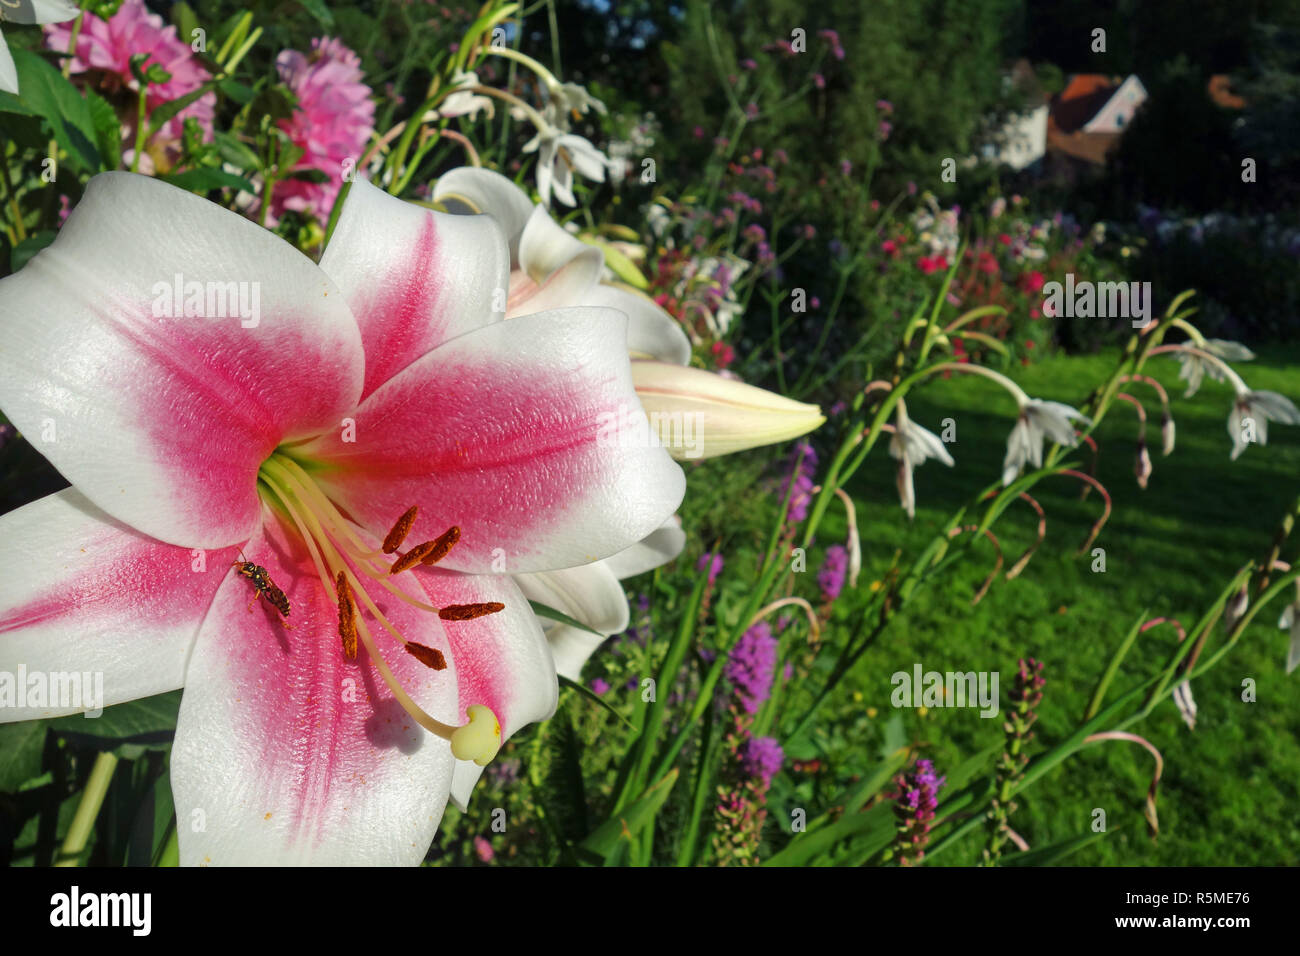 pink white lilies Stock Photo